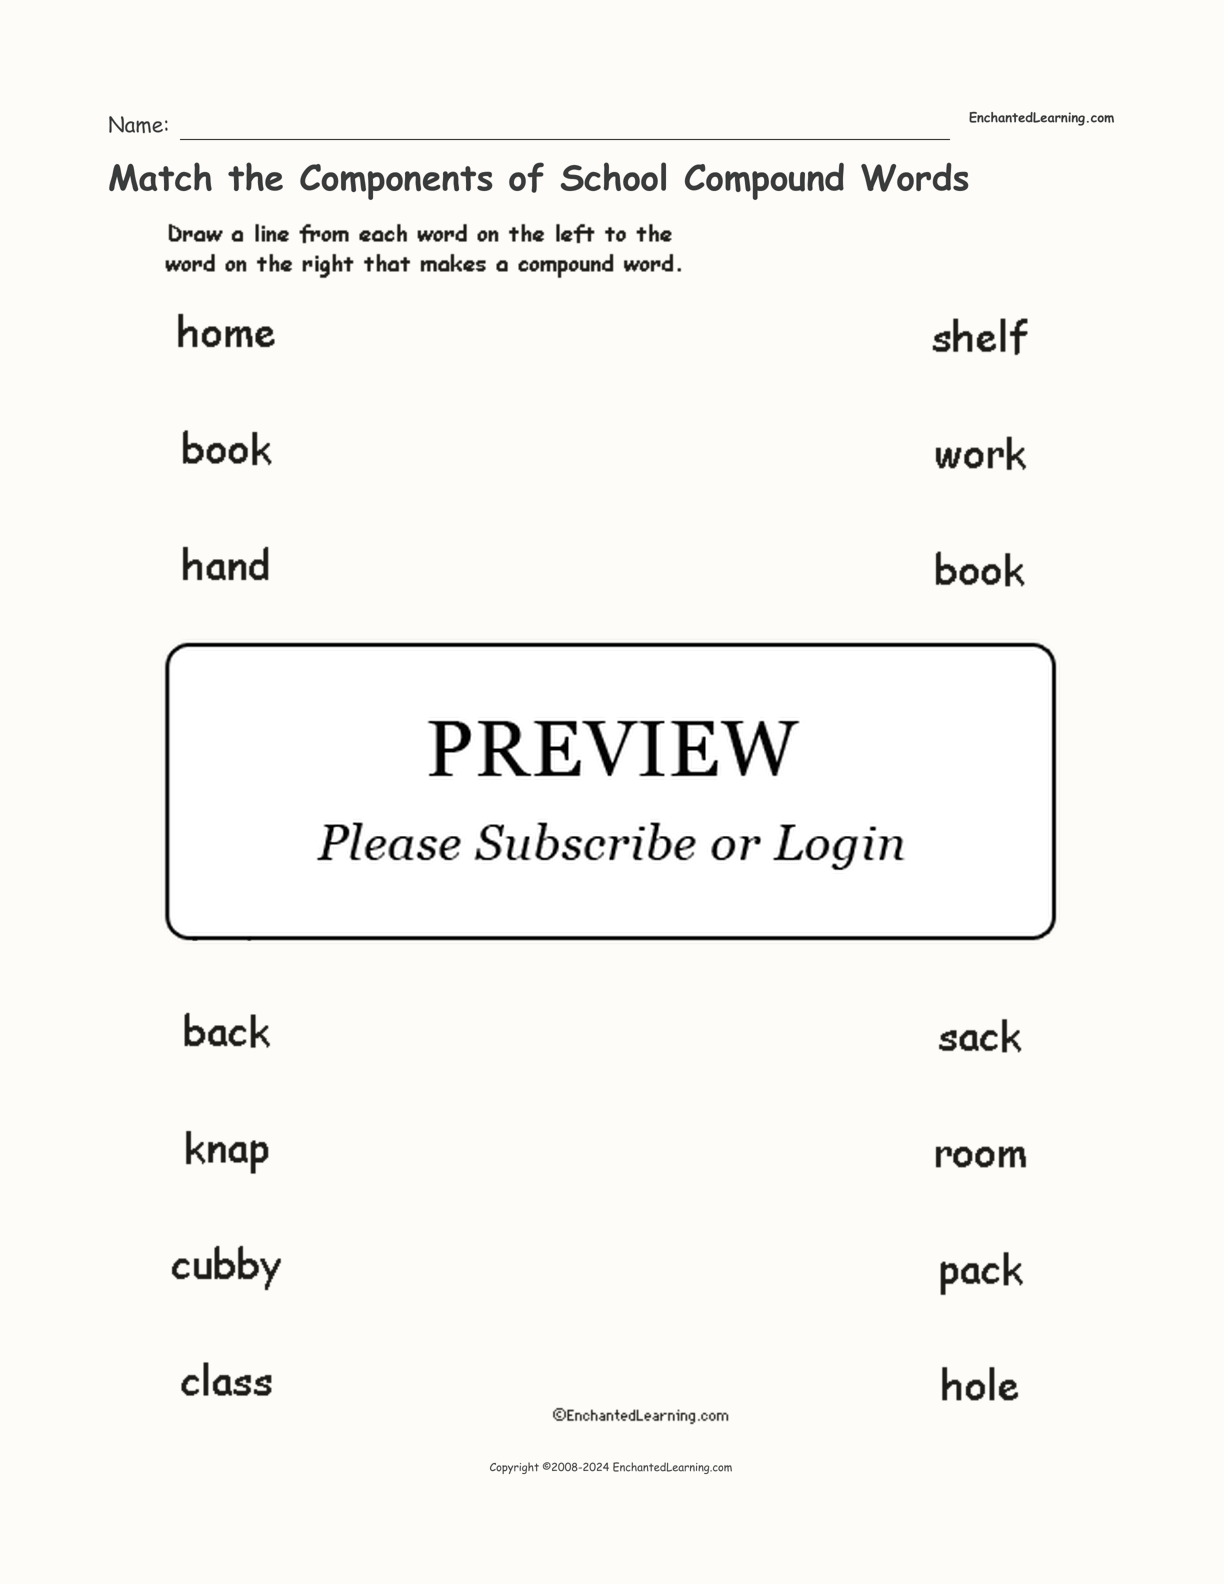 Match the Components of School Compound Words interactive worksheet page 1